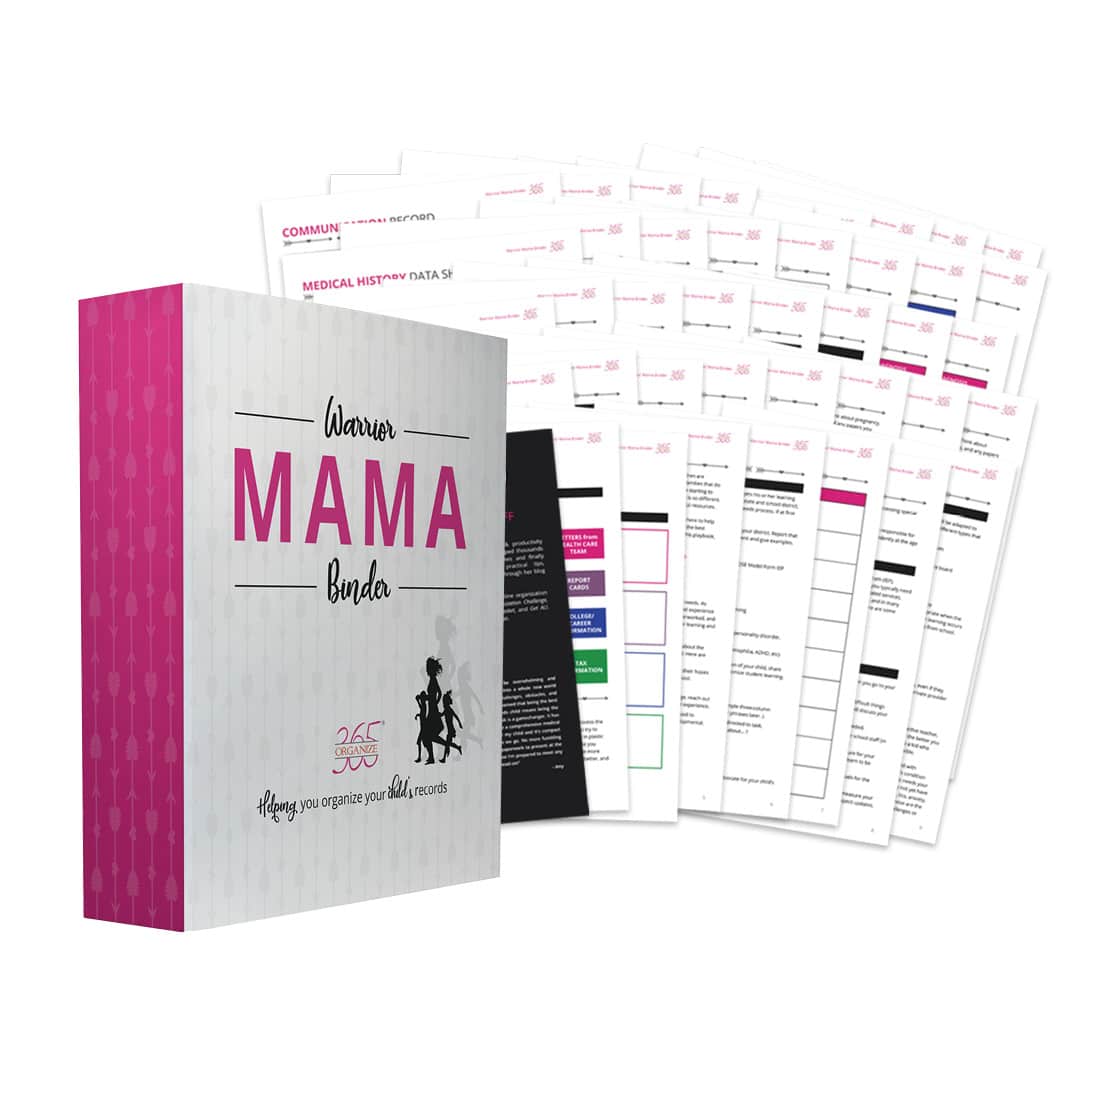 The-Paper-Solution-Warrior-MAMA-Binder